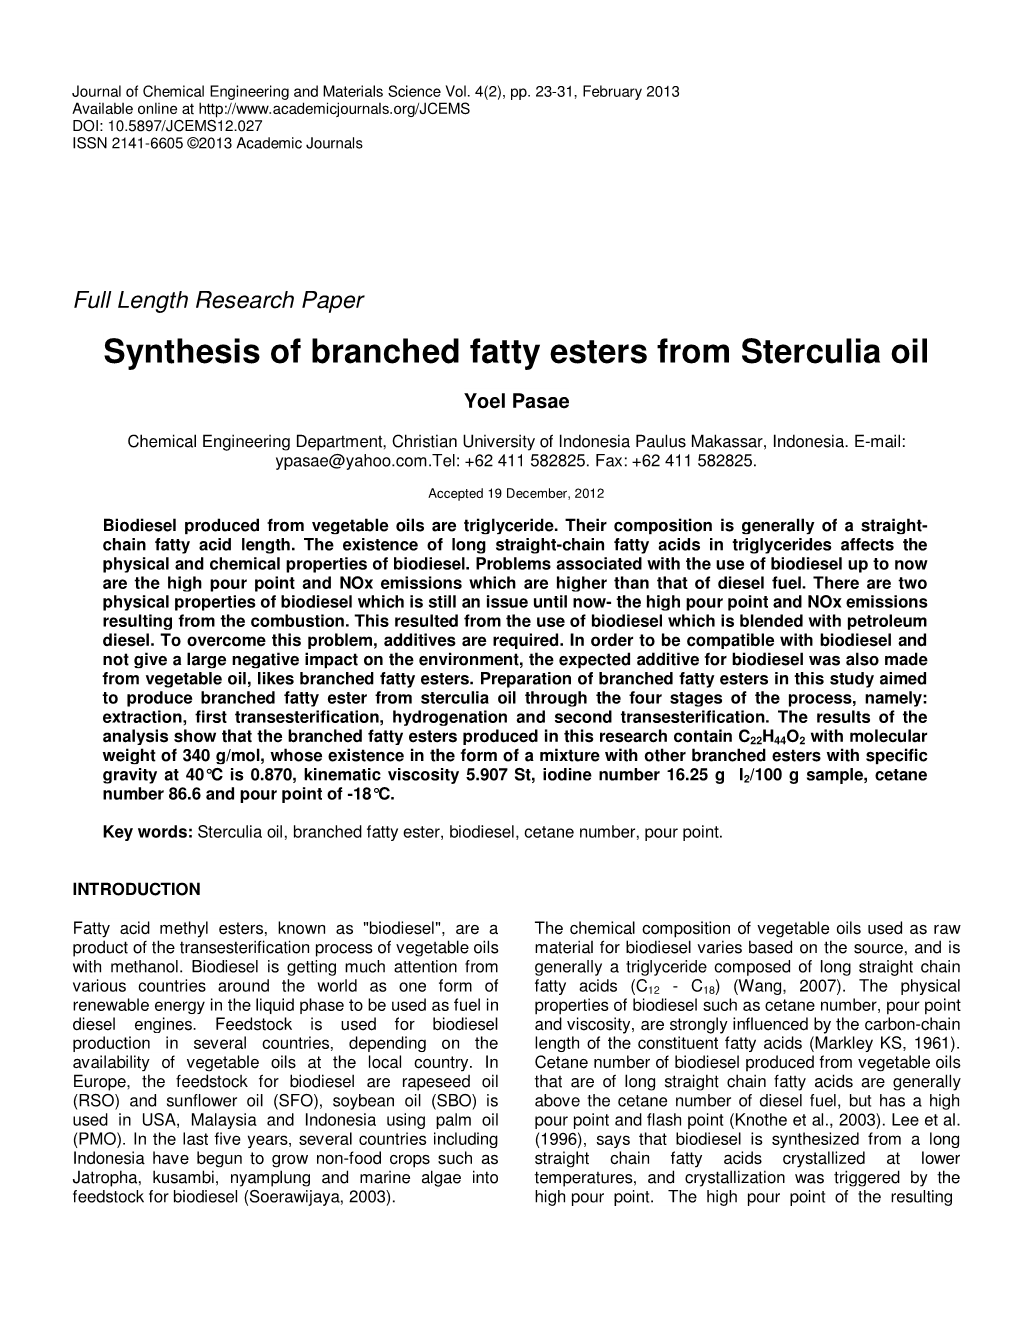 Synthesis of Branched Fatty Esters from Sterculia Oil